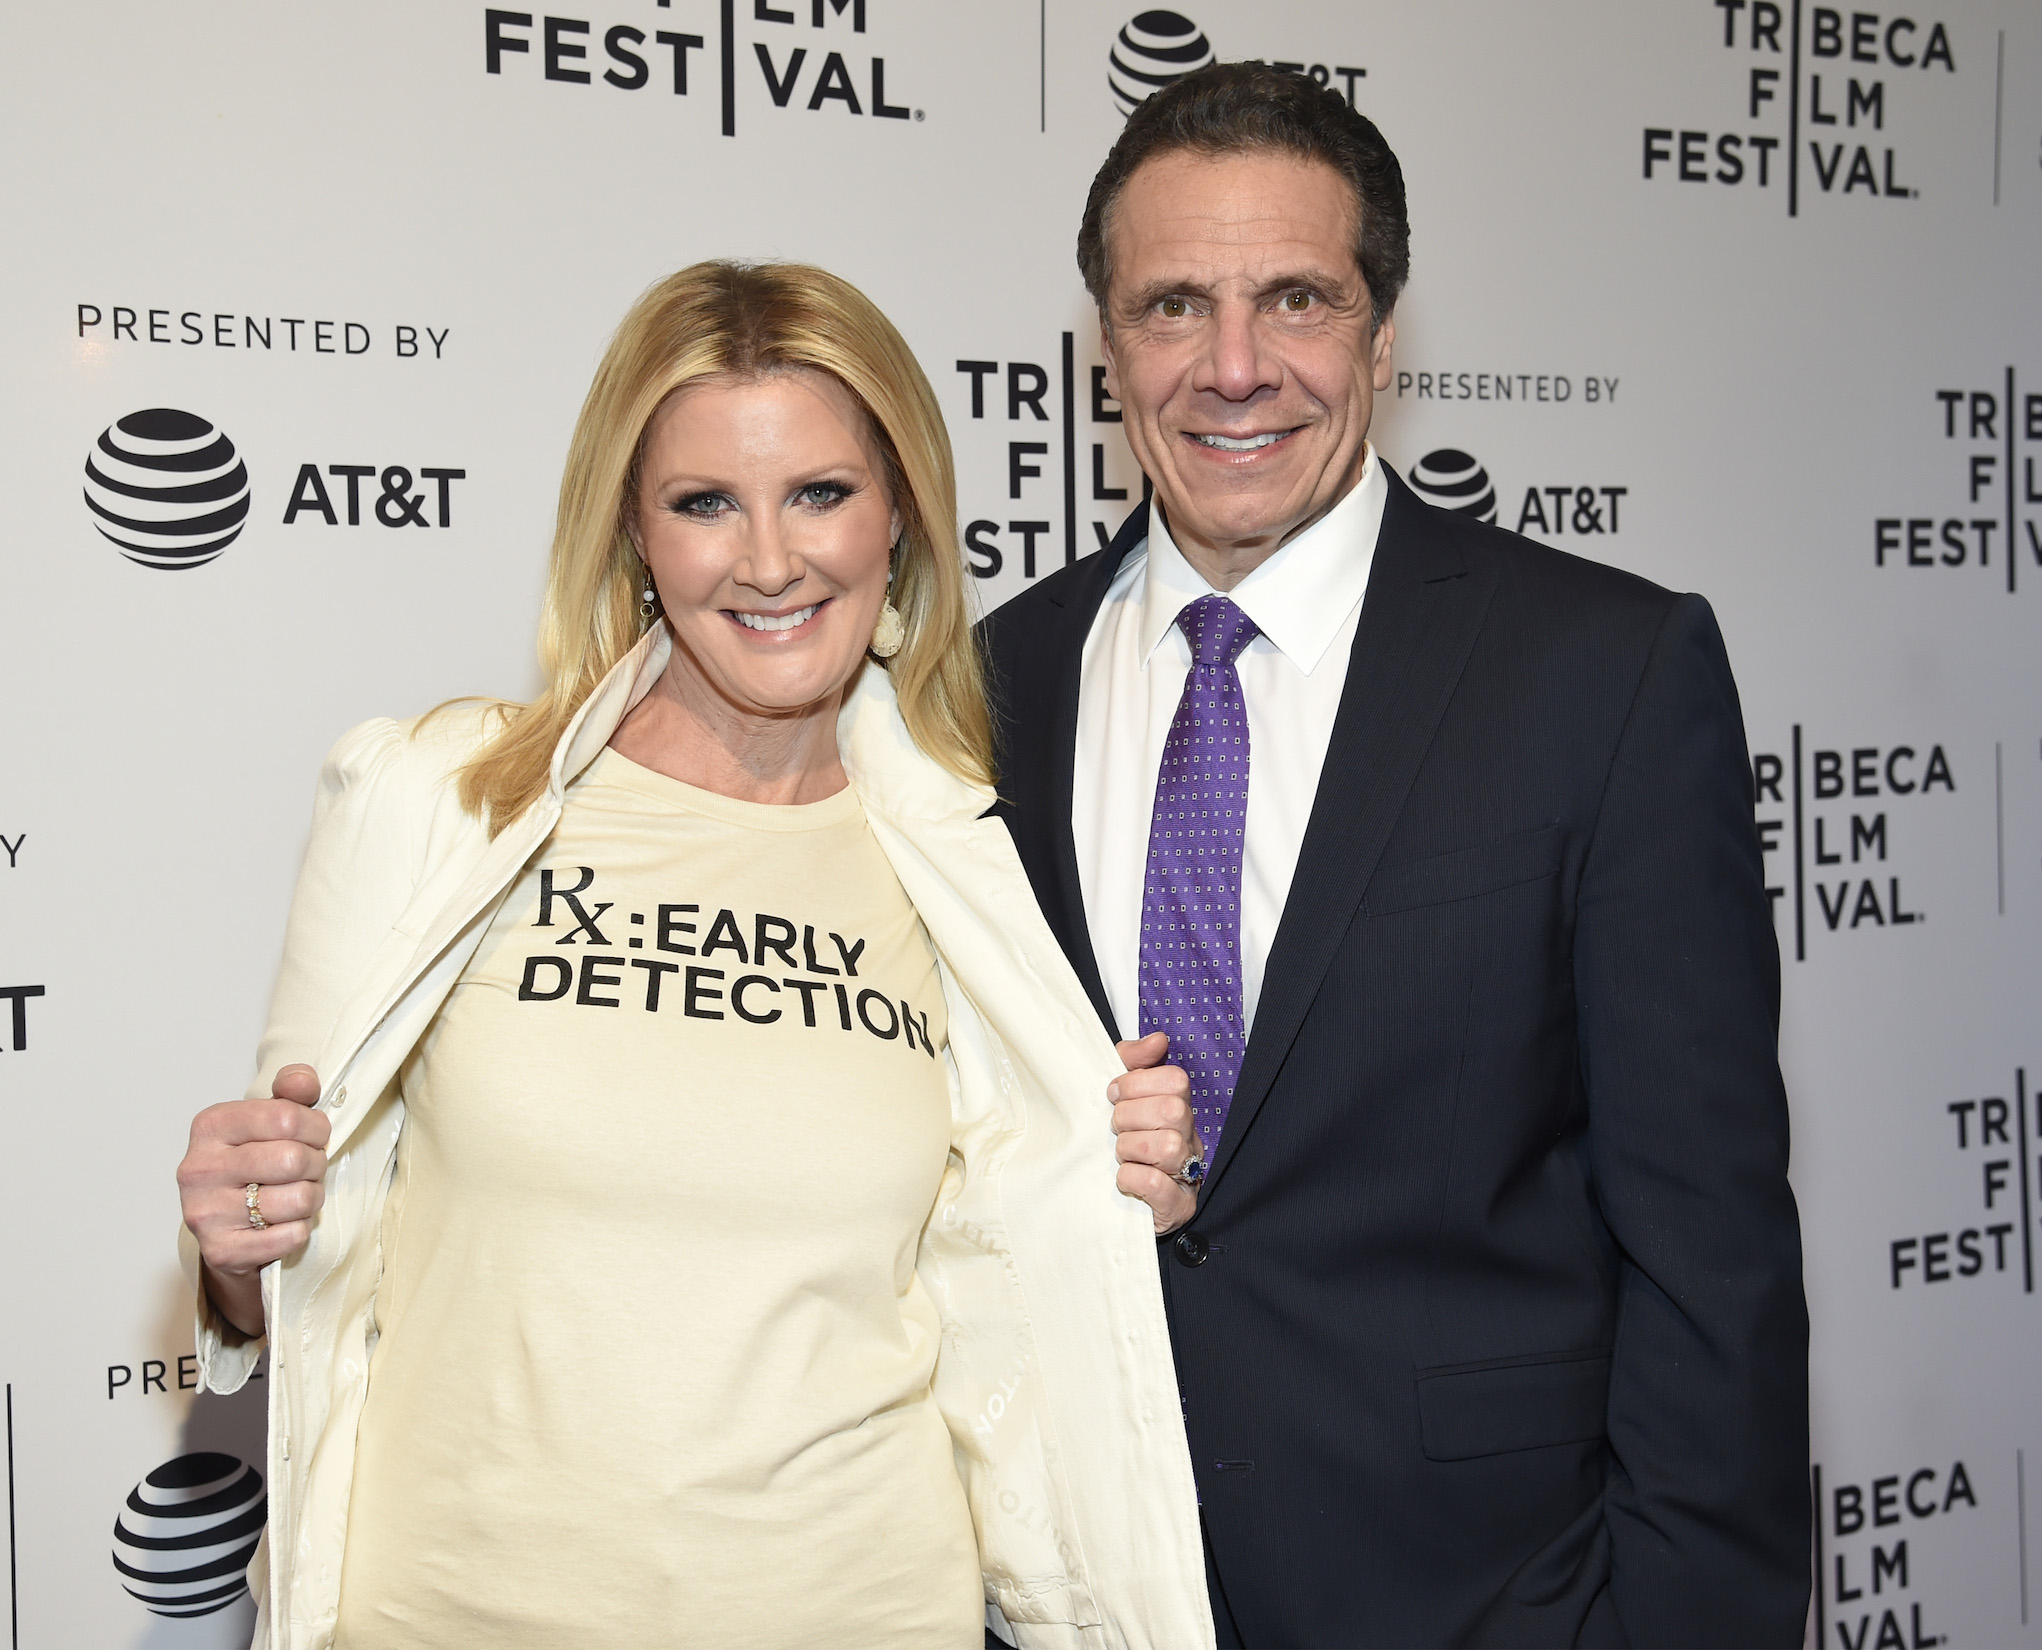 Sandra Lee and New York Governor Andrew Cuomo standing together and smiling at a documentary premiere